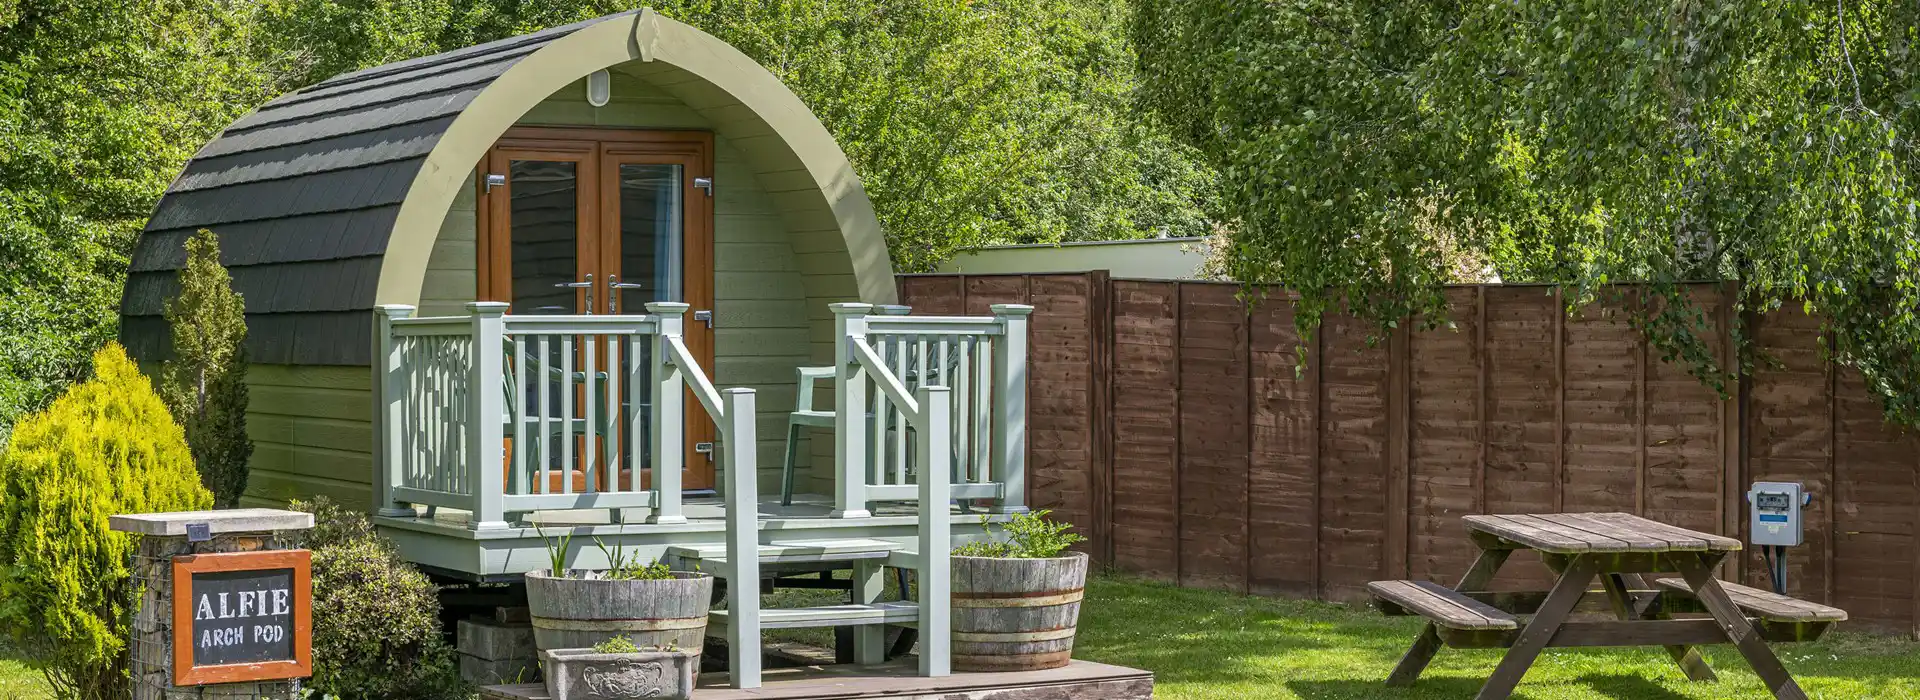 Camping and glamping pods near me